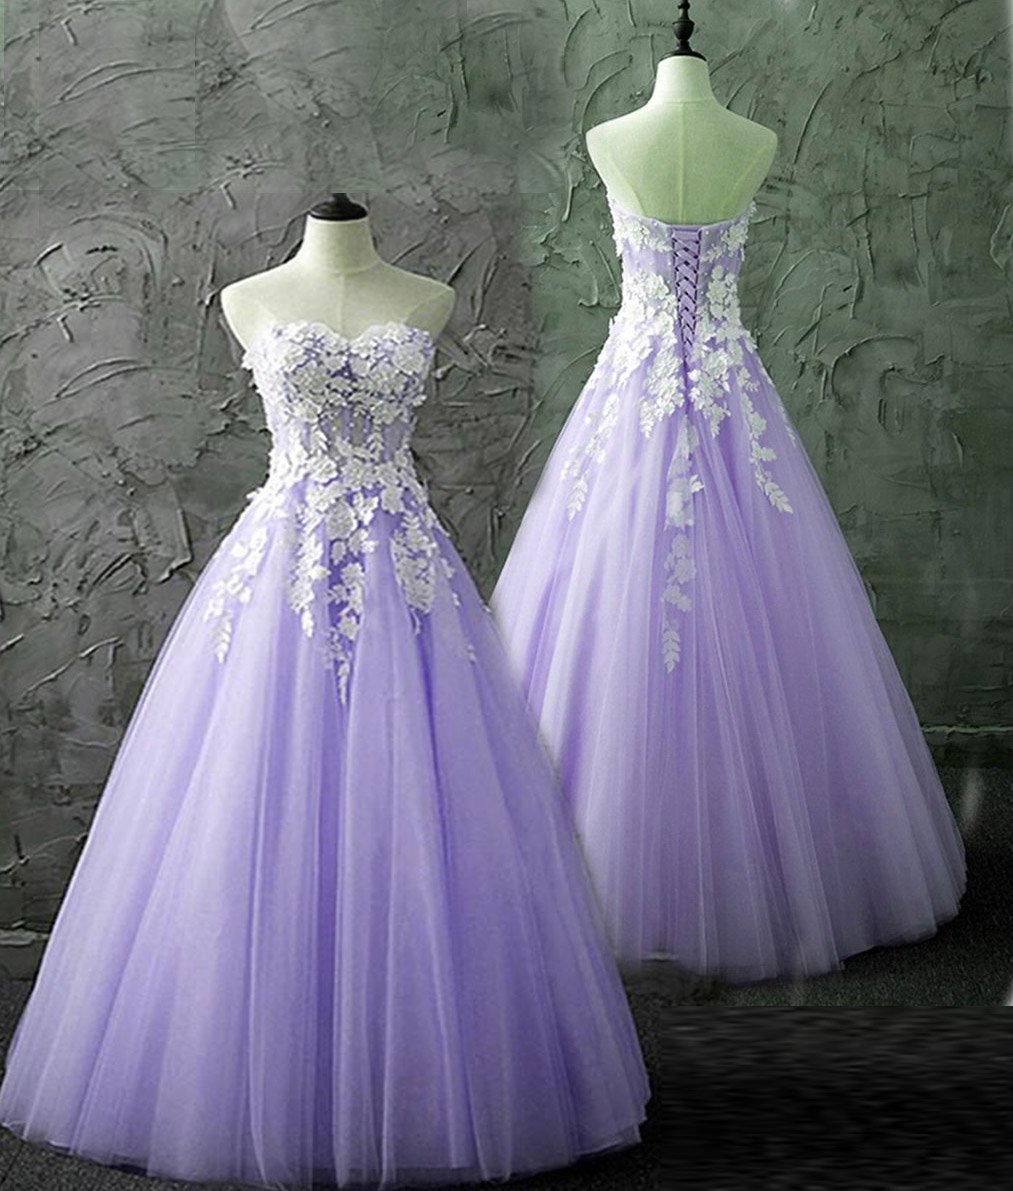 Beautiful Lavender Sweetheart Ball Gown Sweet 16 Party Dress, Lavender Prom Dress 2021